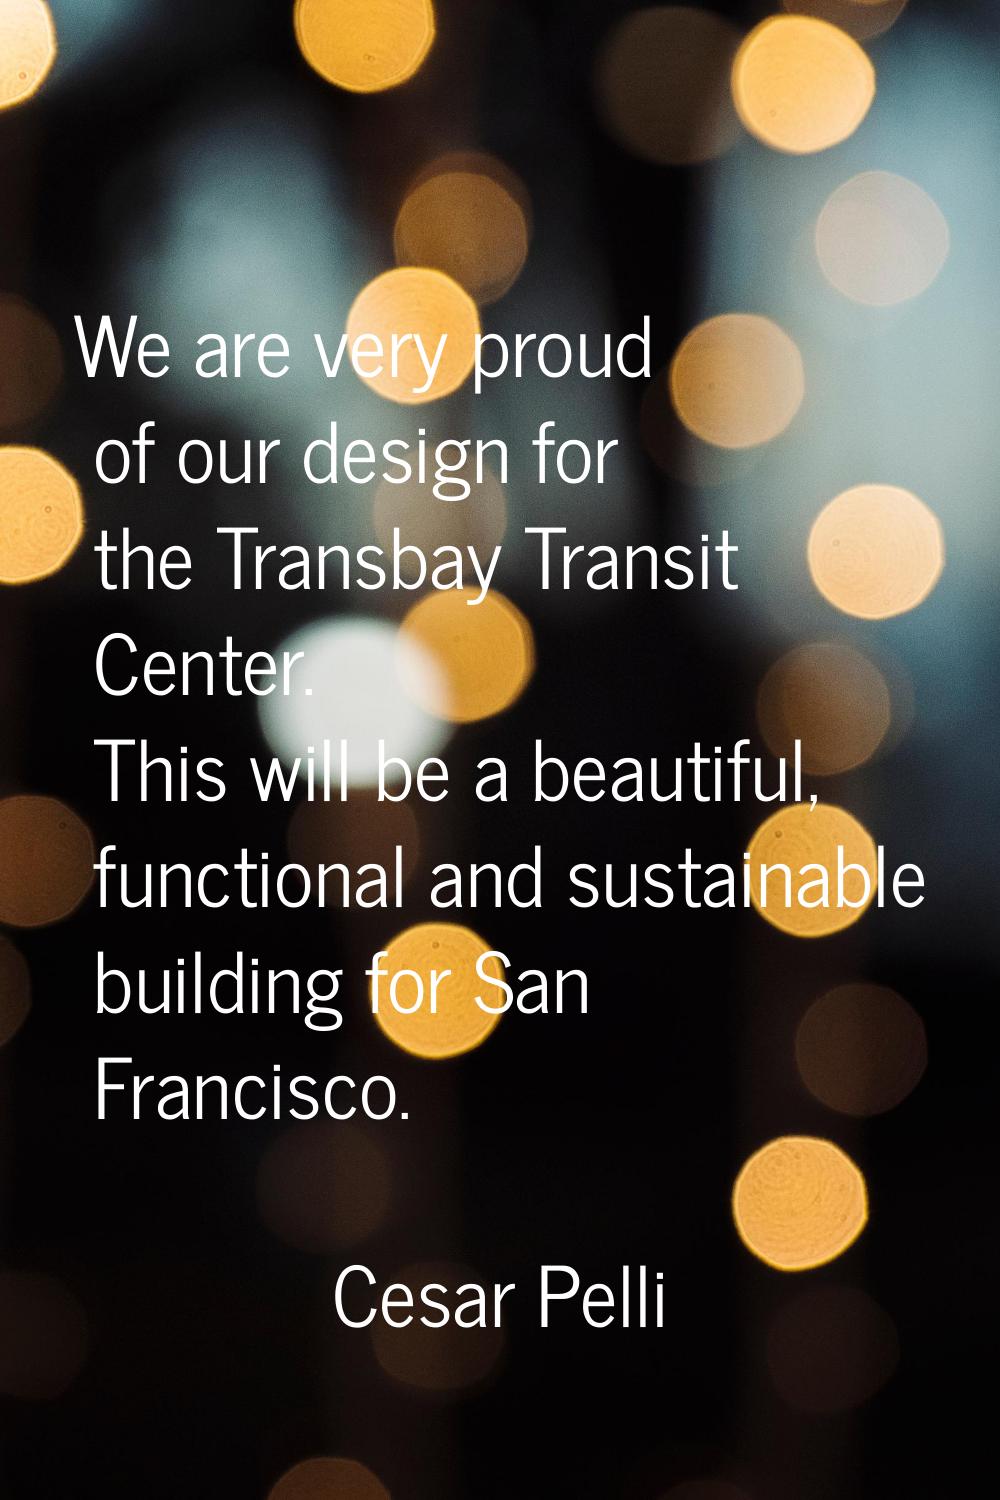 We are very proud of our design for the Transbay Transit Center. This will be a beautiful, function